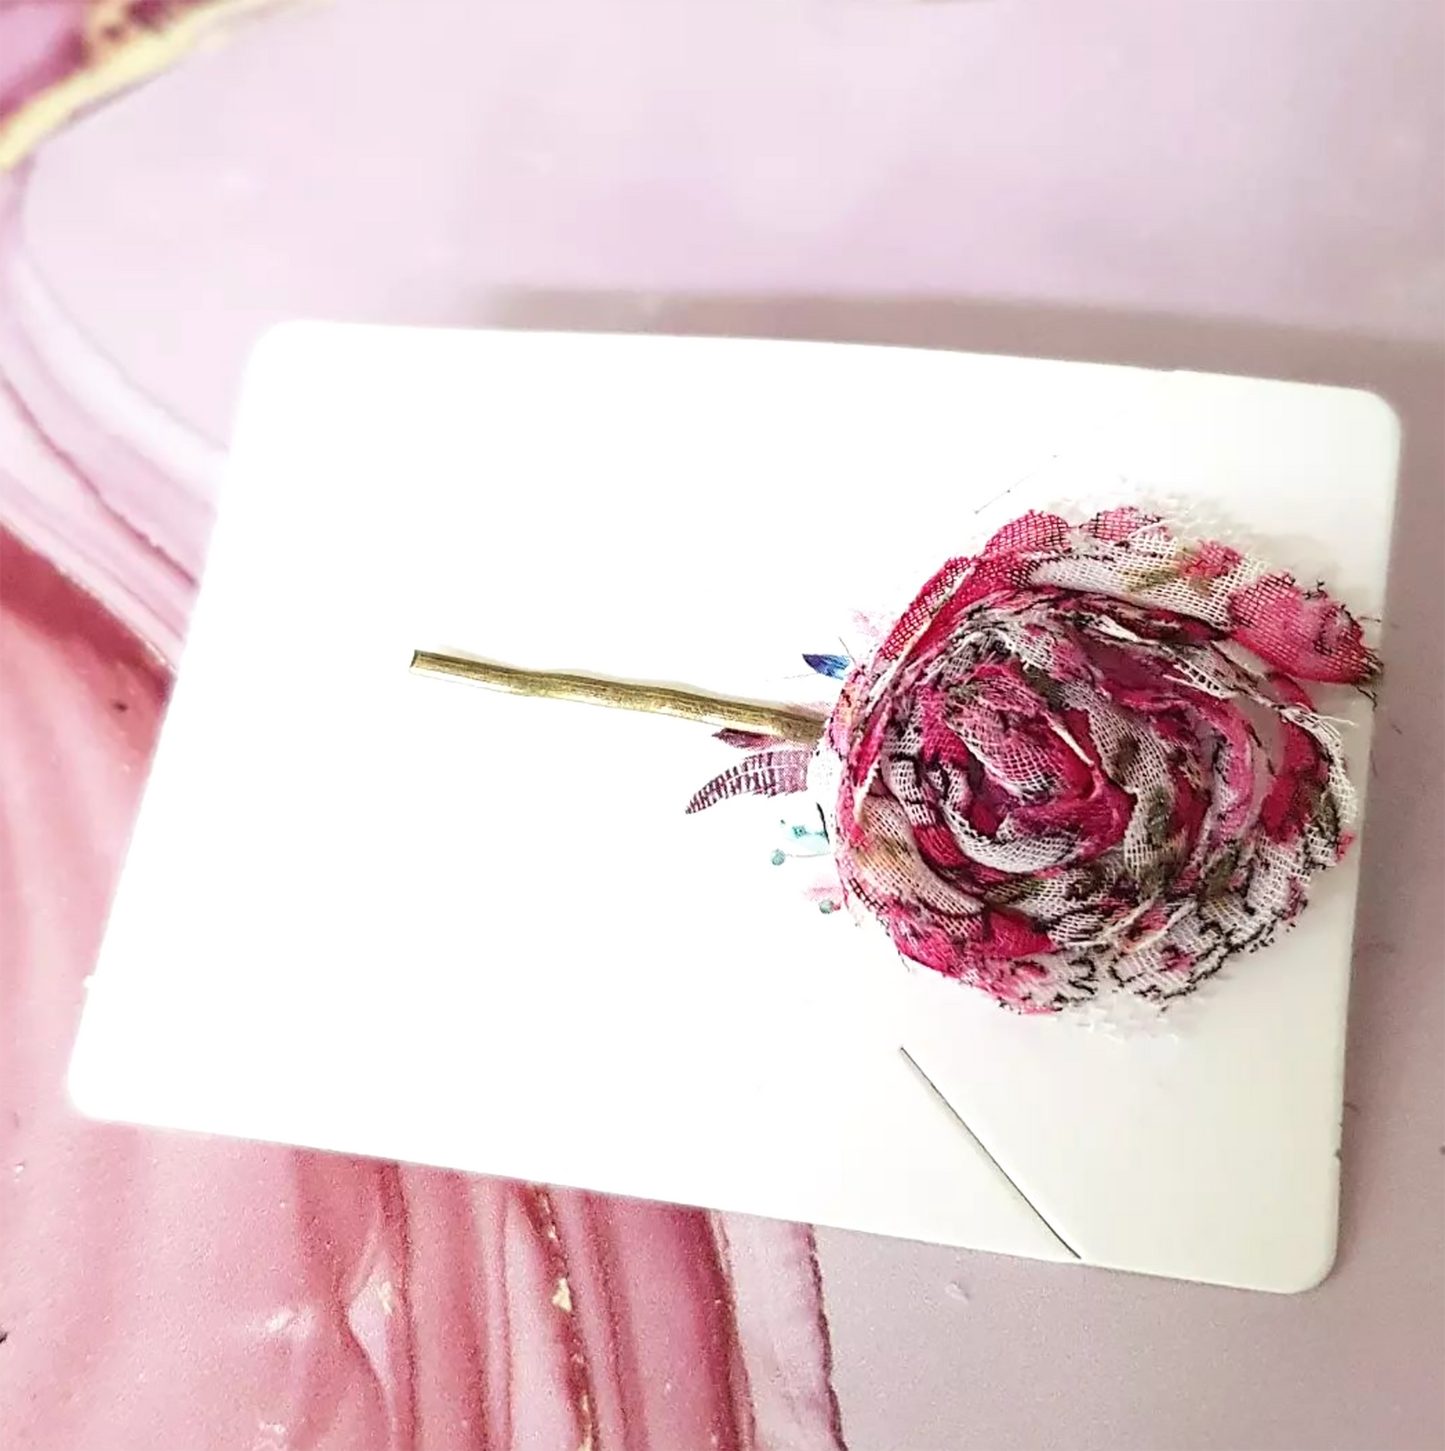 "flower hair grip - Crafted with Love: Each Pink Fabric Rose Hairpin is Handmade with Care, Adding a Touch of Artisanal Charm to Your Look 🎀 #Handcrafted #UniqueStyle"